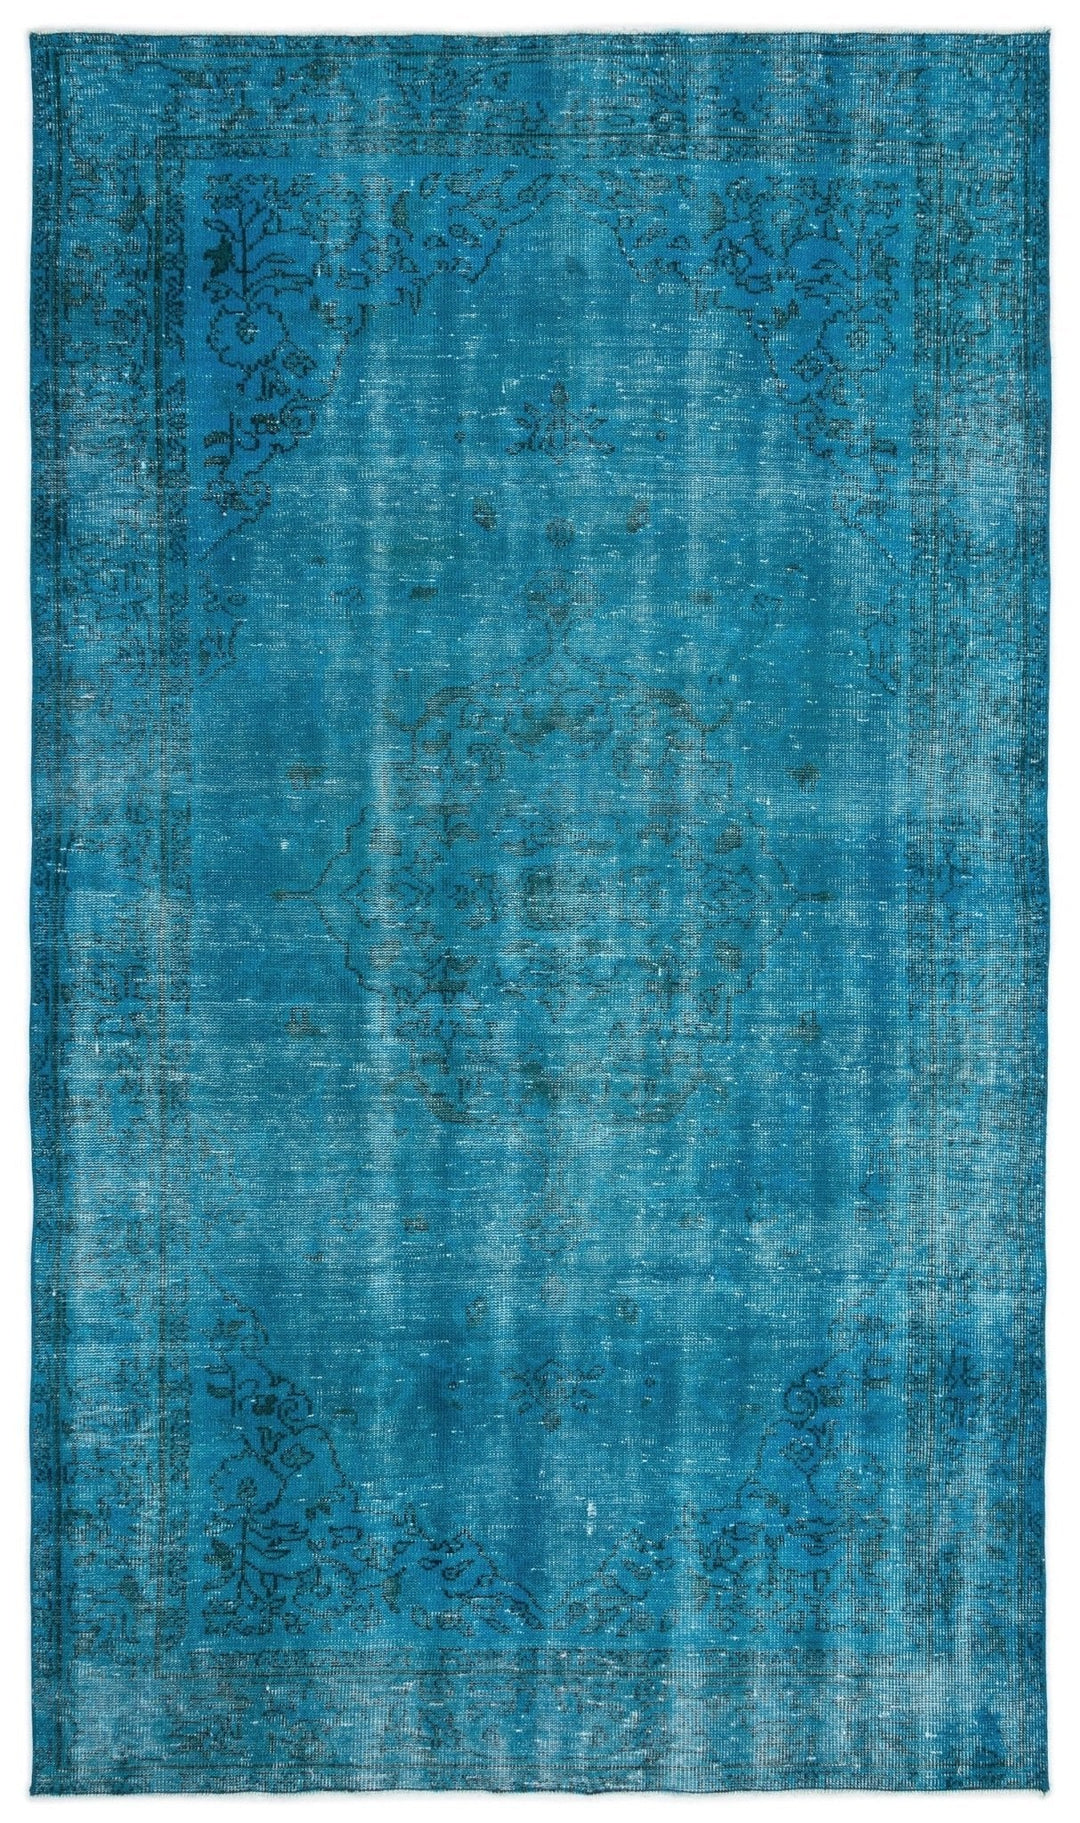 Athens 16555 Turquoise Tumbled Wool Hand Woven Carpet 163 x 282